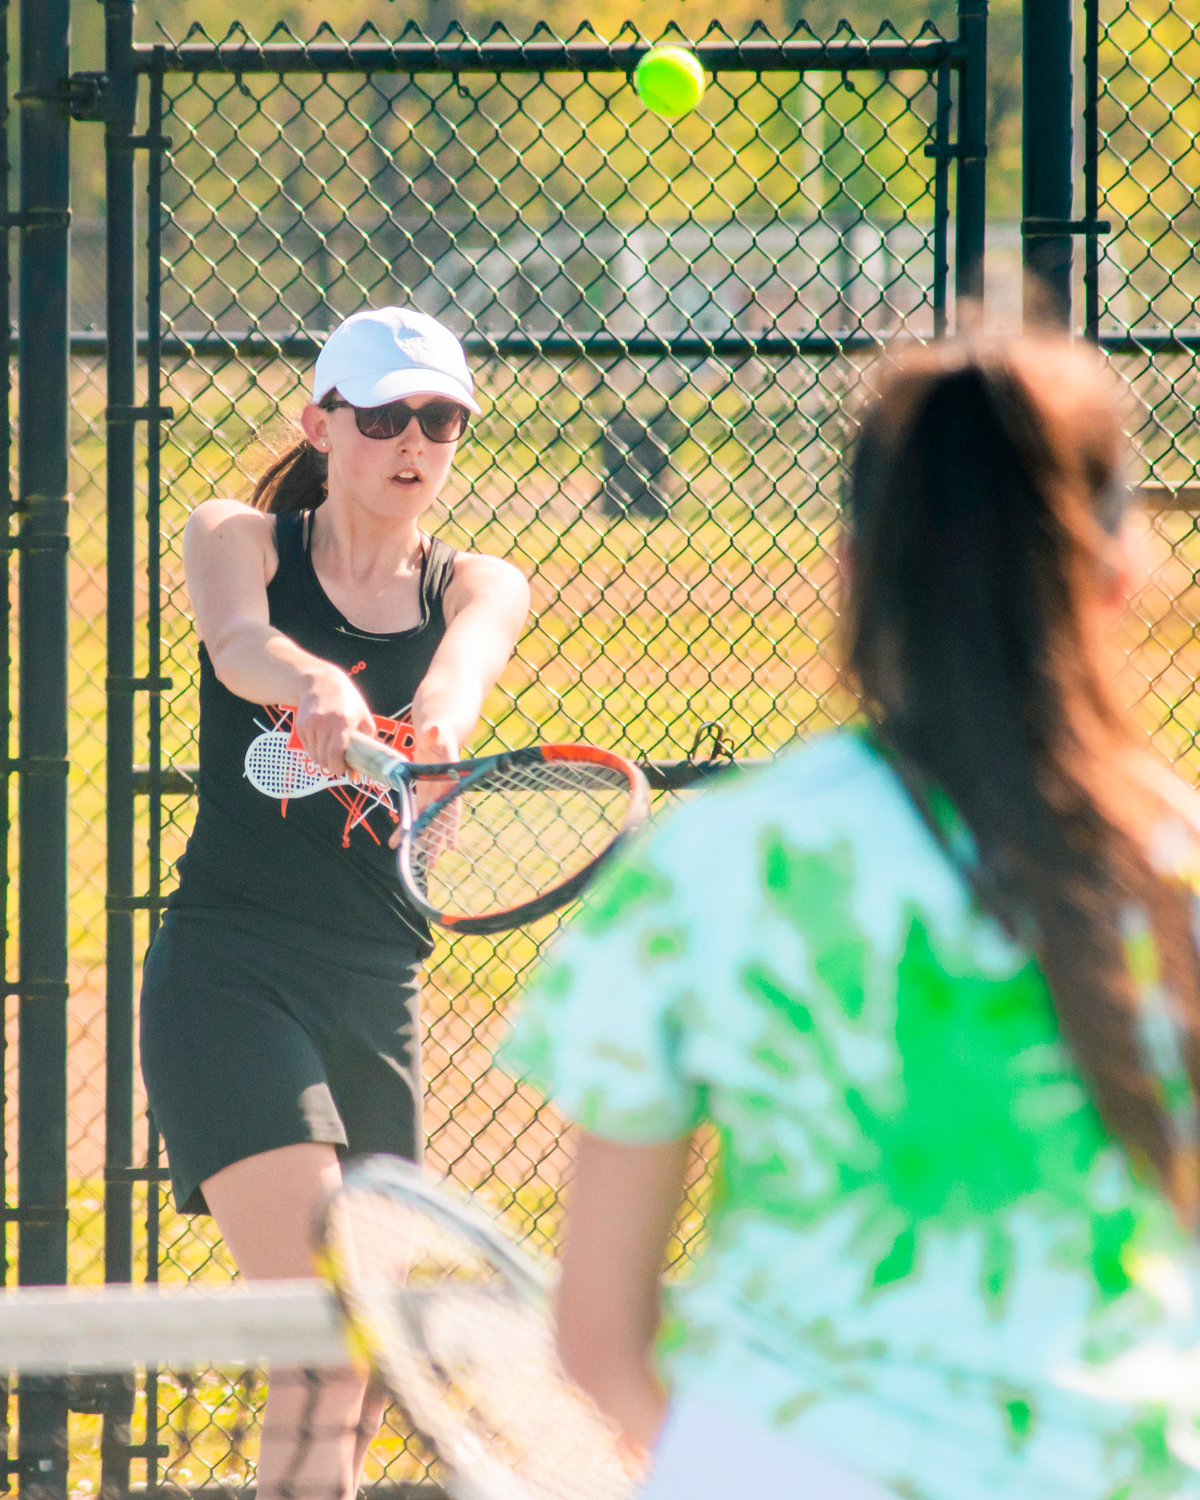 Centralia’s Maya O’Dell makes contact during a tennis match against Tumwater Wednesday afternoon.